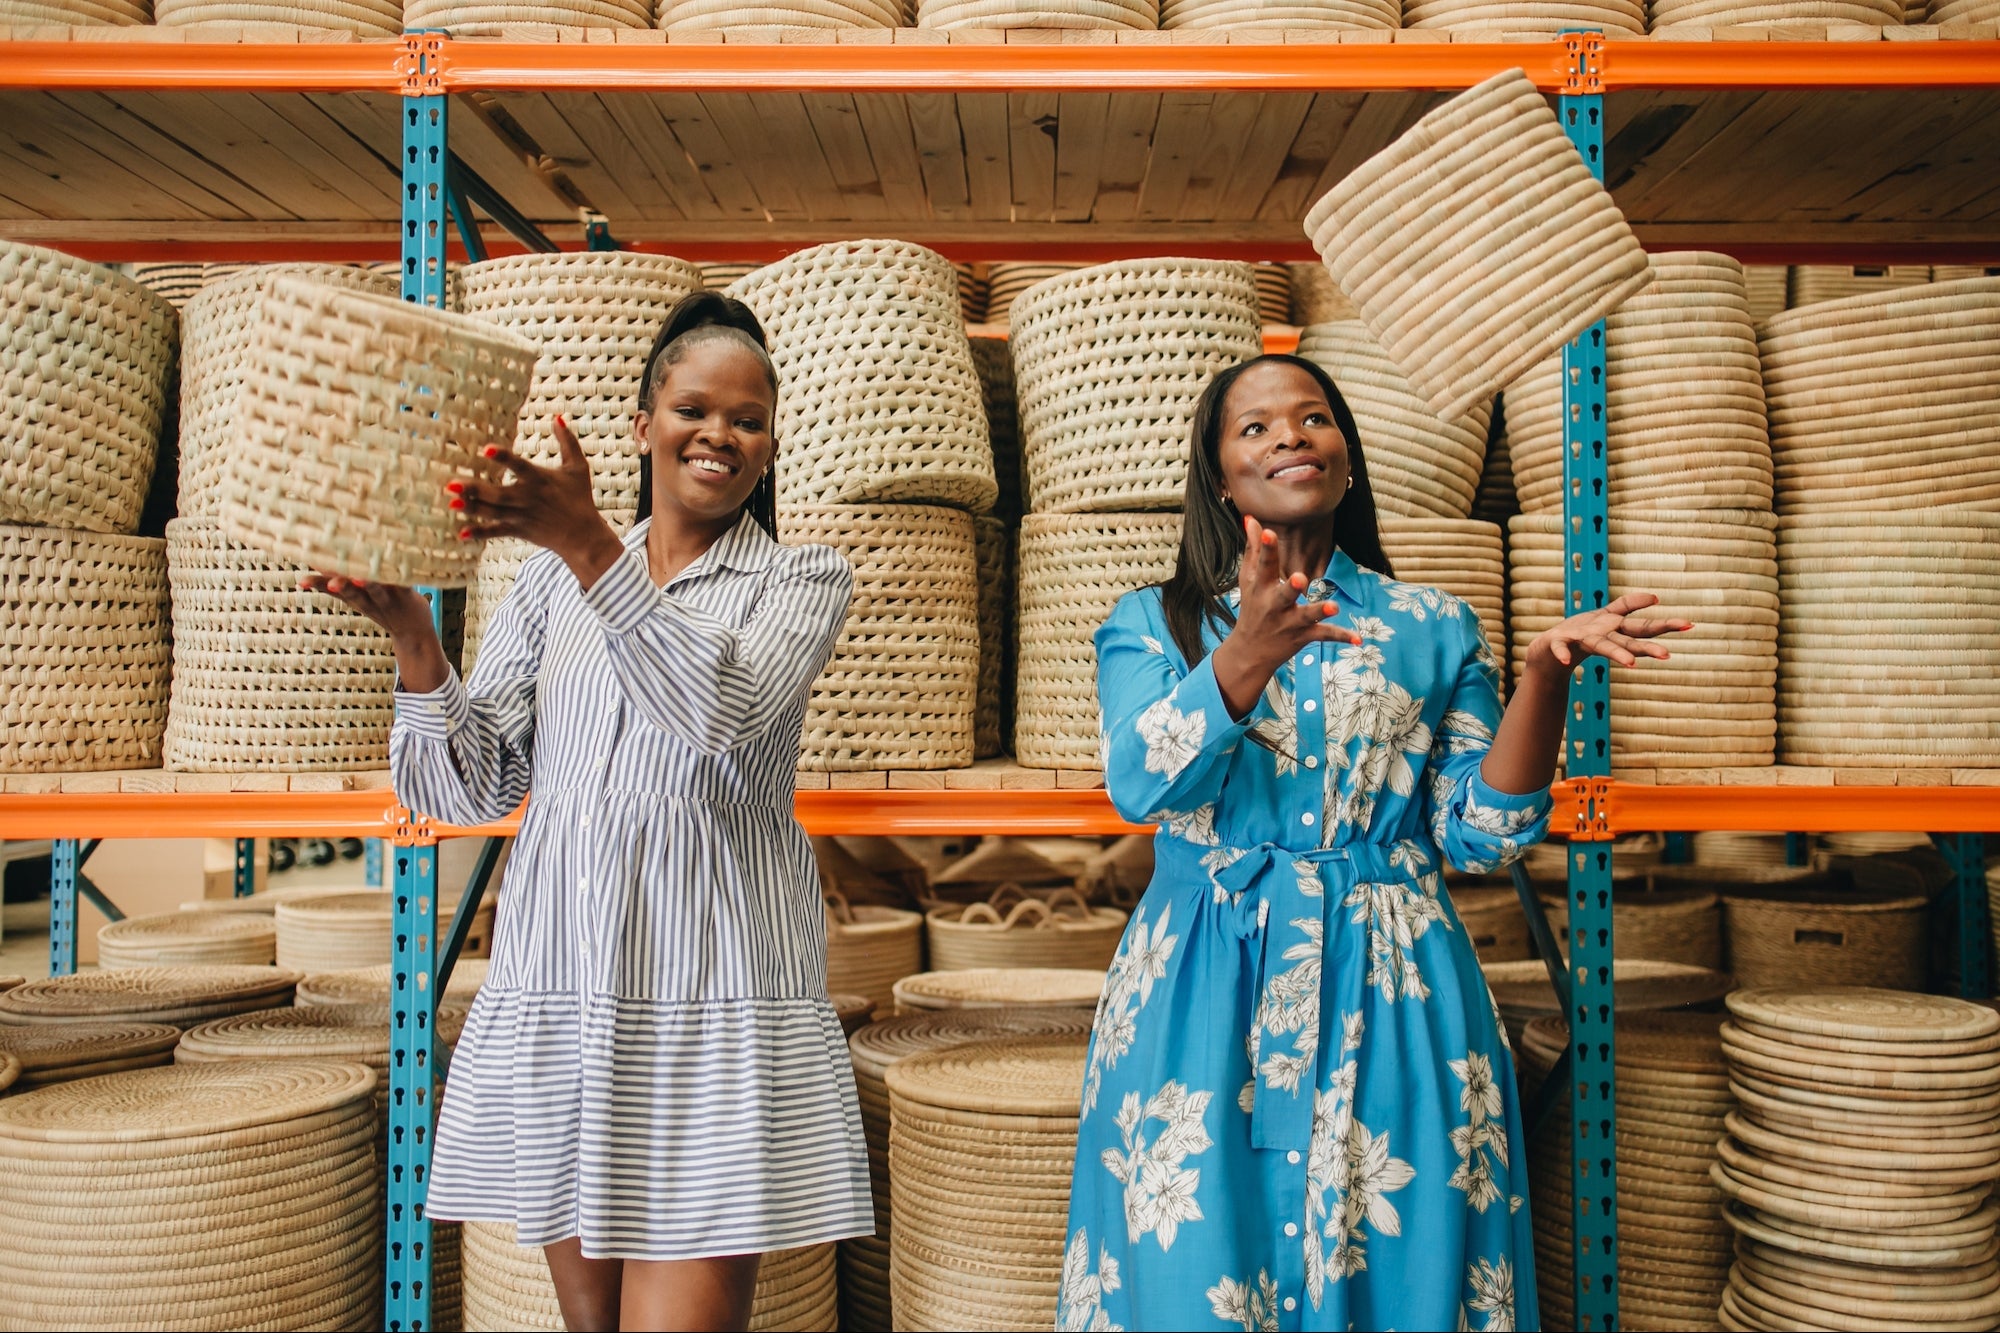 These Sisters Quit Their Jobs Mid-Pandemic to Risk it All For Their Brand. Now They're Not Only Thriving, But Working to End The Cycle of Poverty in South Africa.